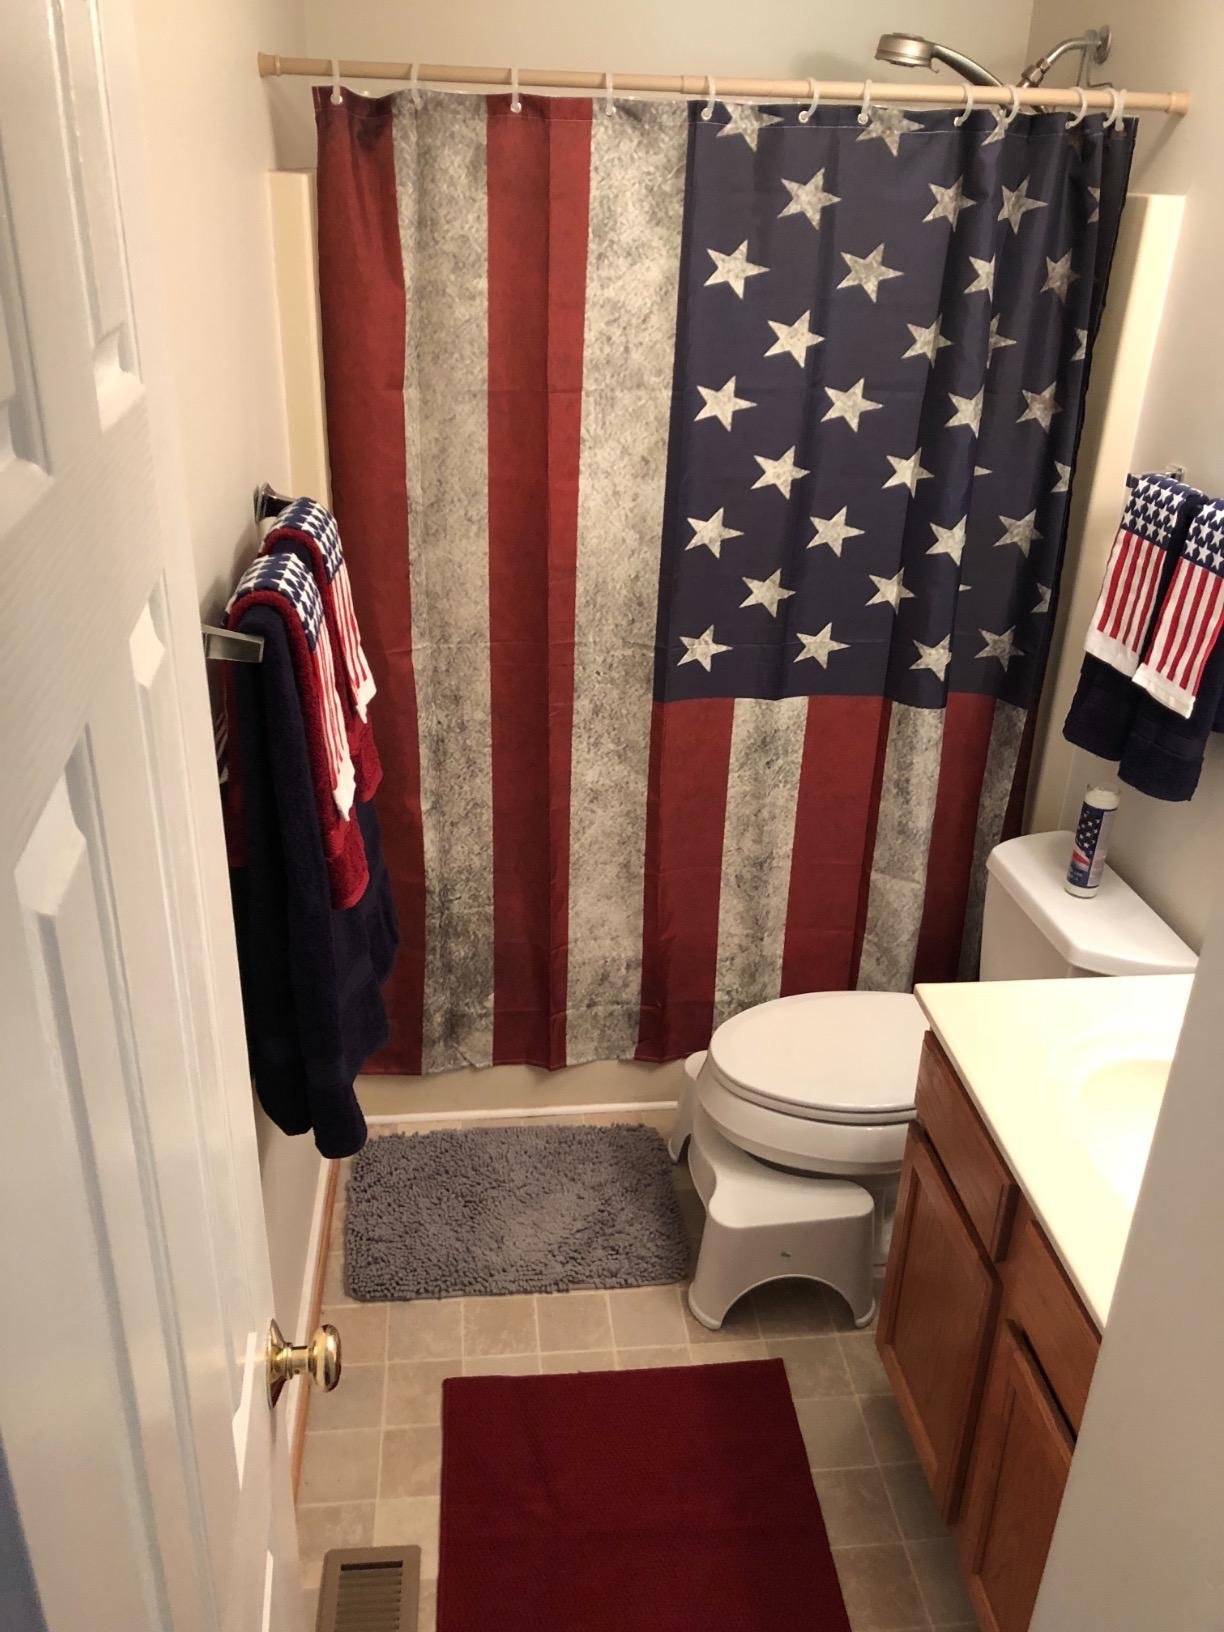 Vintage Rustic 4th of July American Flag Shower Curtain Set - 4 Pcs